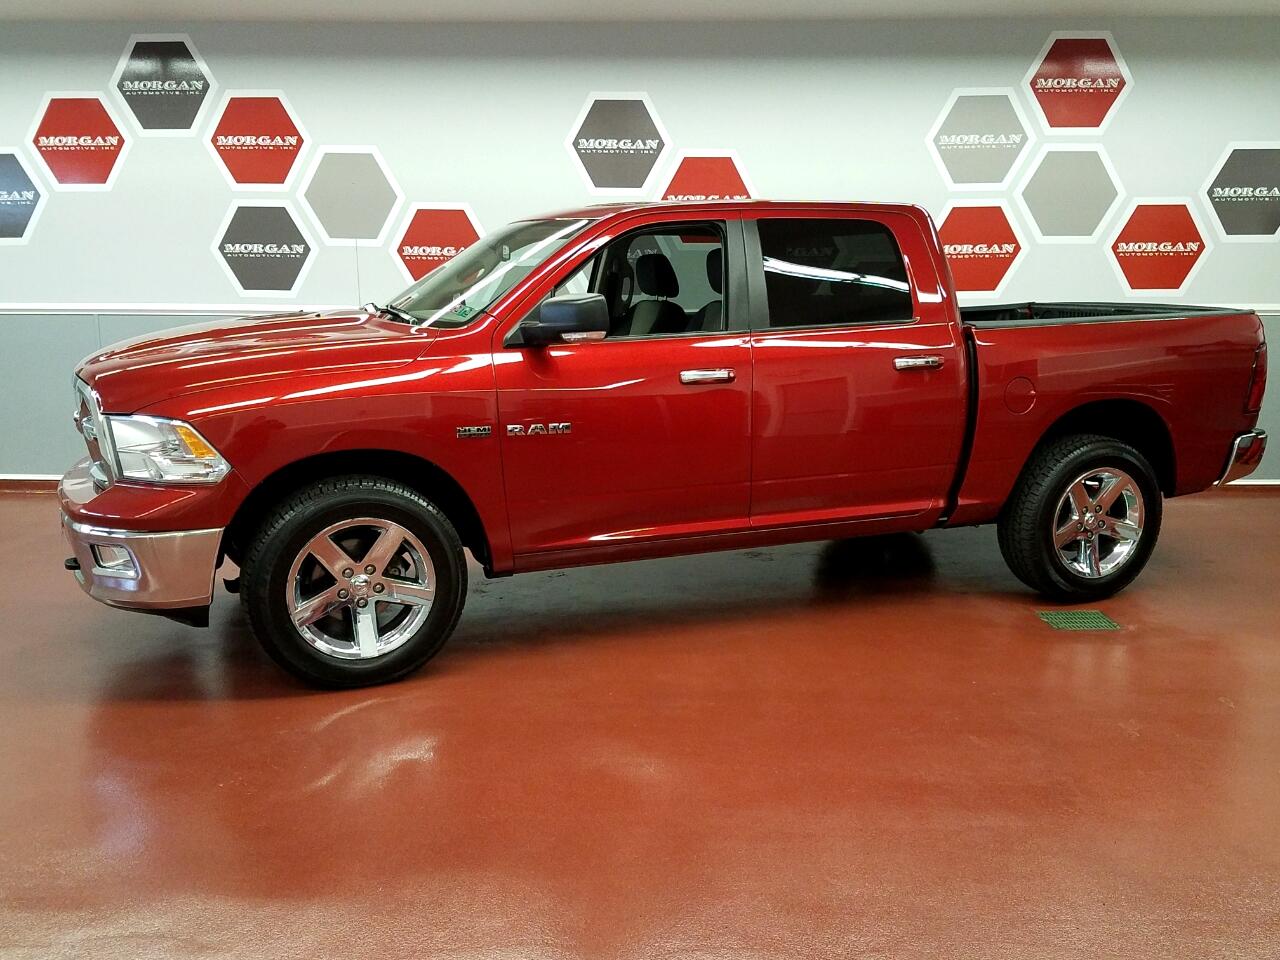 Used 2009 Dodge Ram 1500 BigHorn Crew Cab 4WD for Sale in Lancaster PA 2009 Dodge Ram 1500 Tow Haul Mode